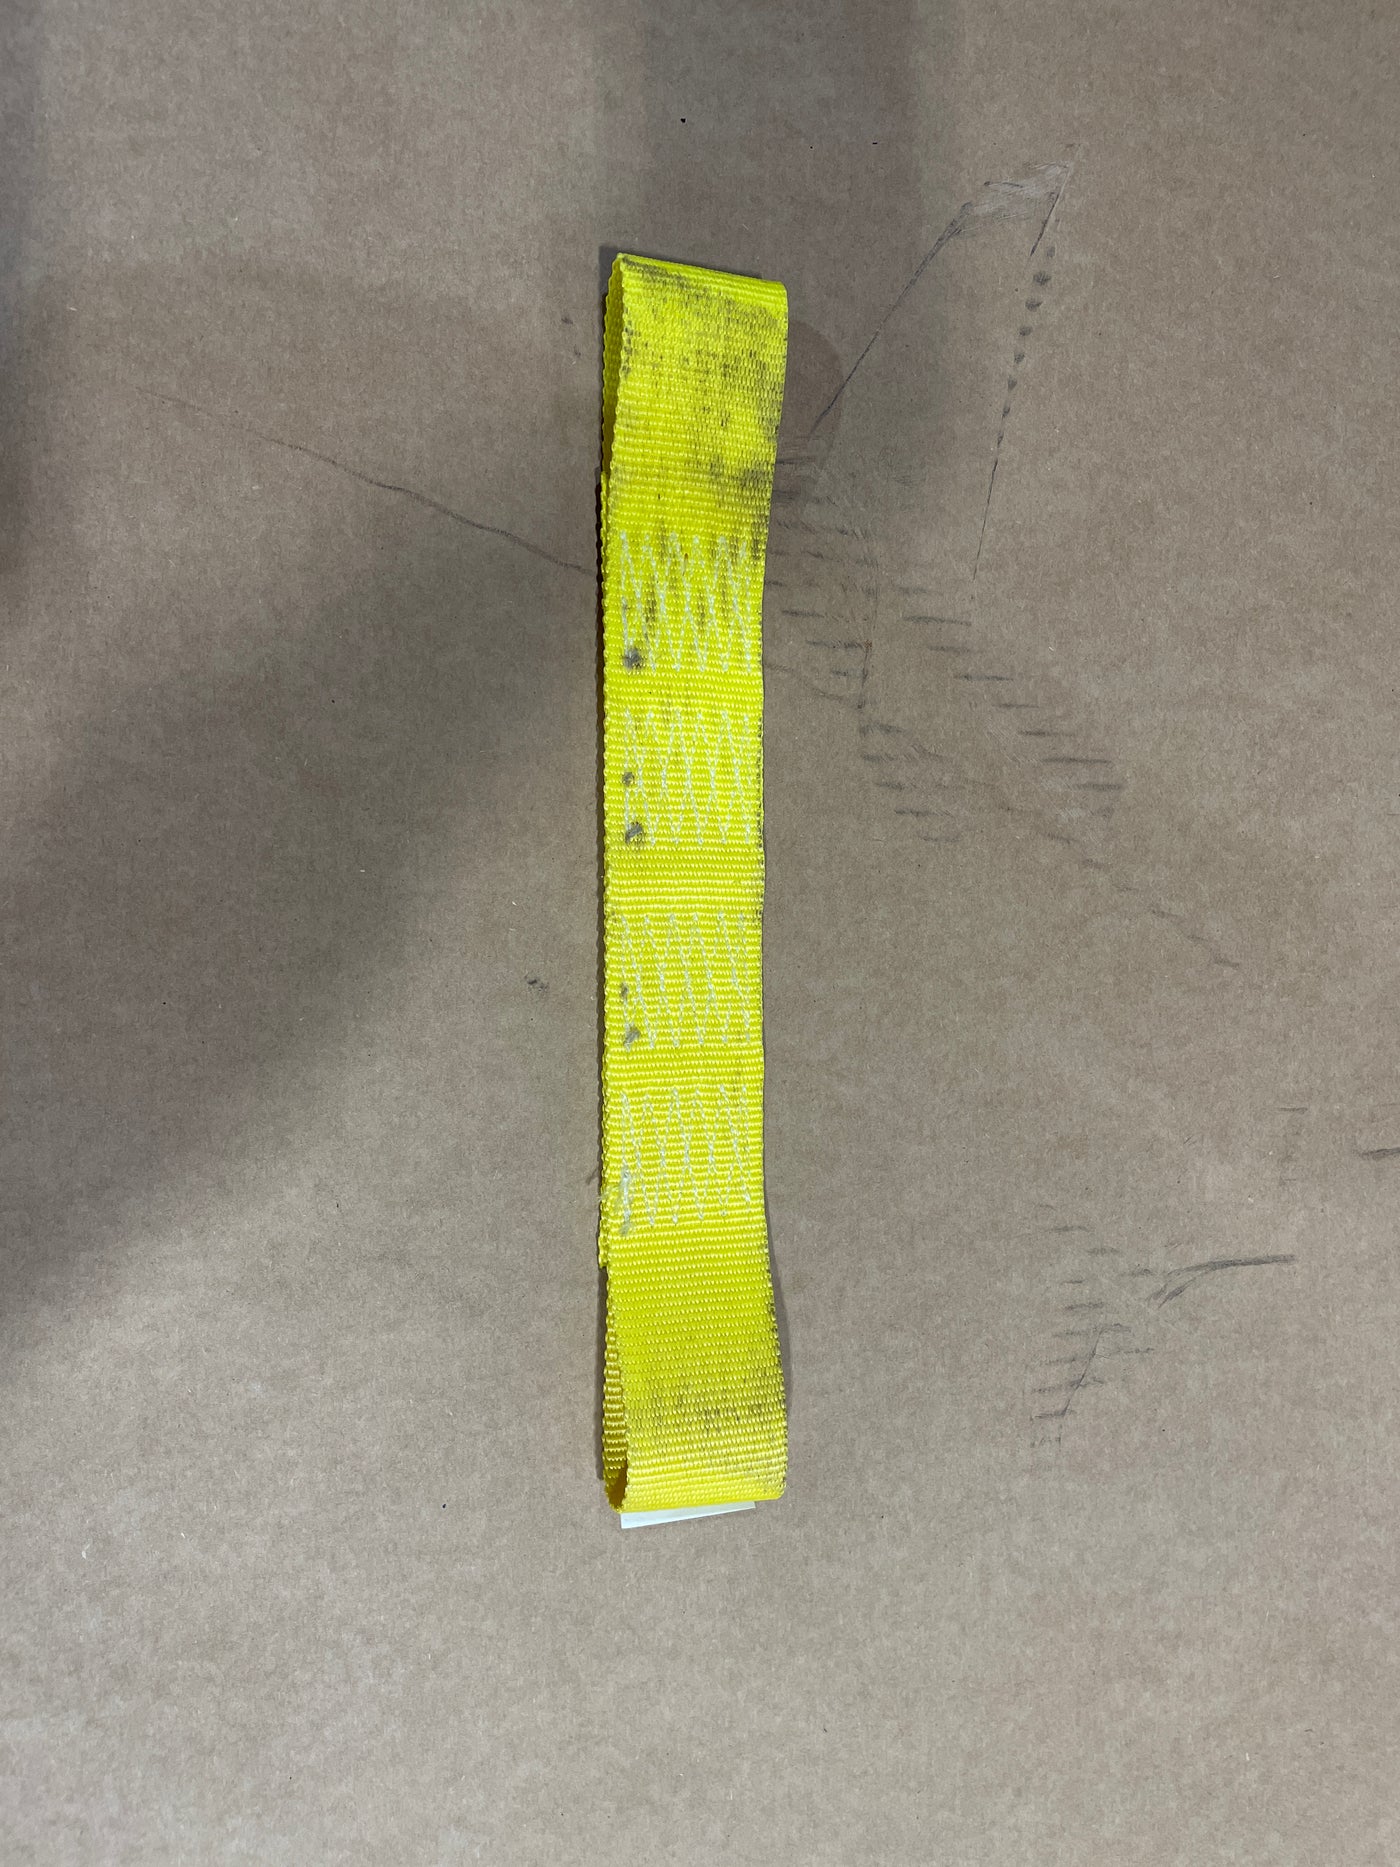 Yellow Safety Strap